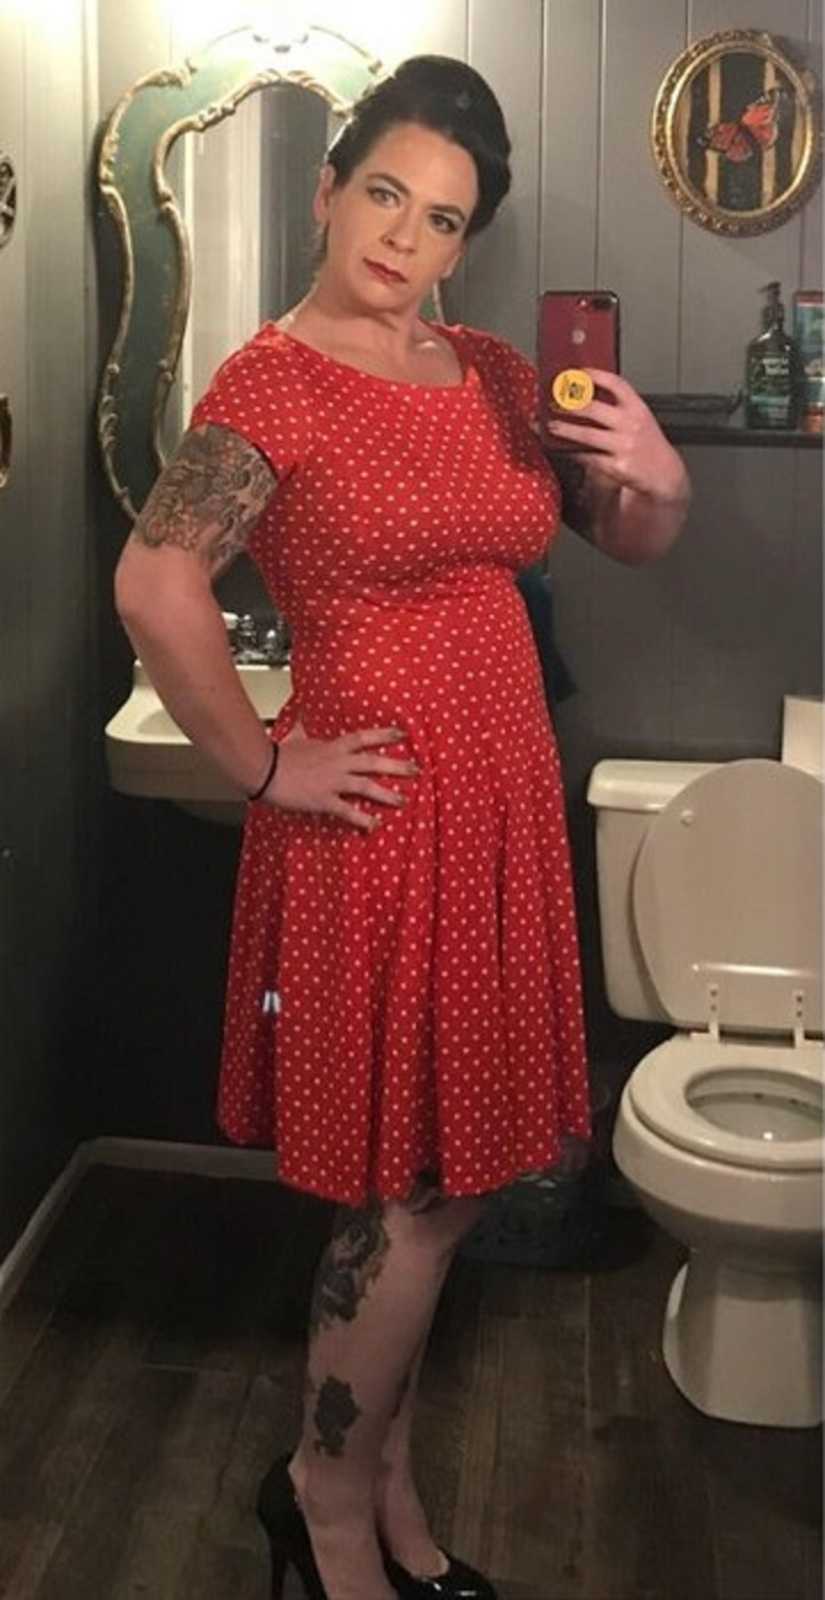 Mother who was once ashamed of her body takes mirror selfie in red dress in bathroom